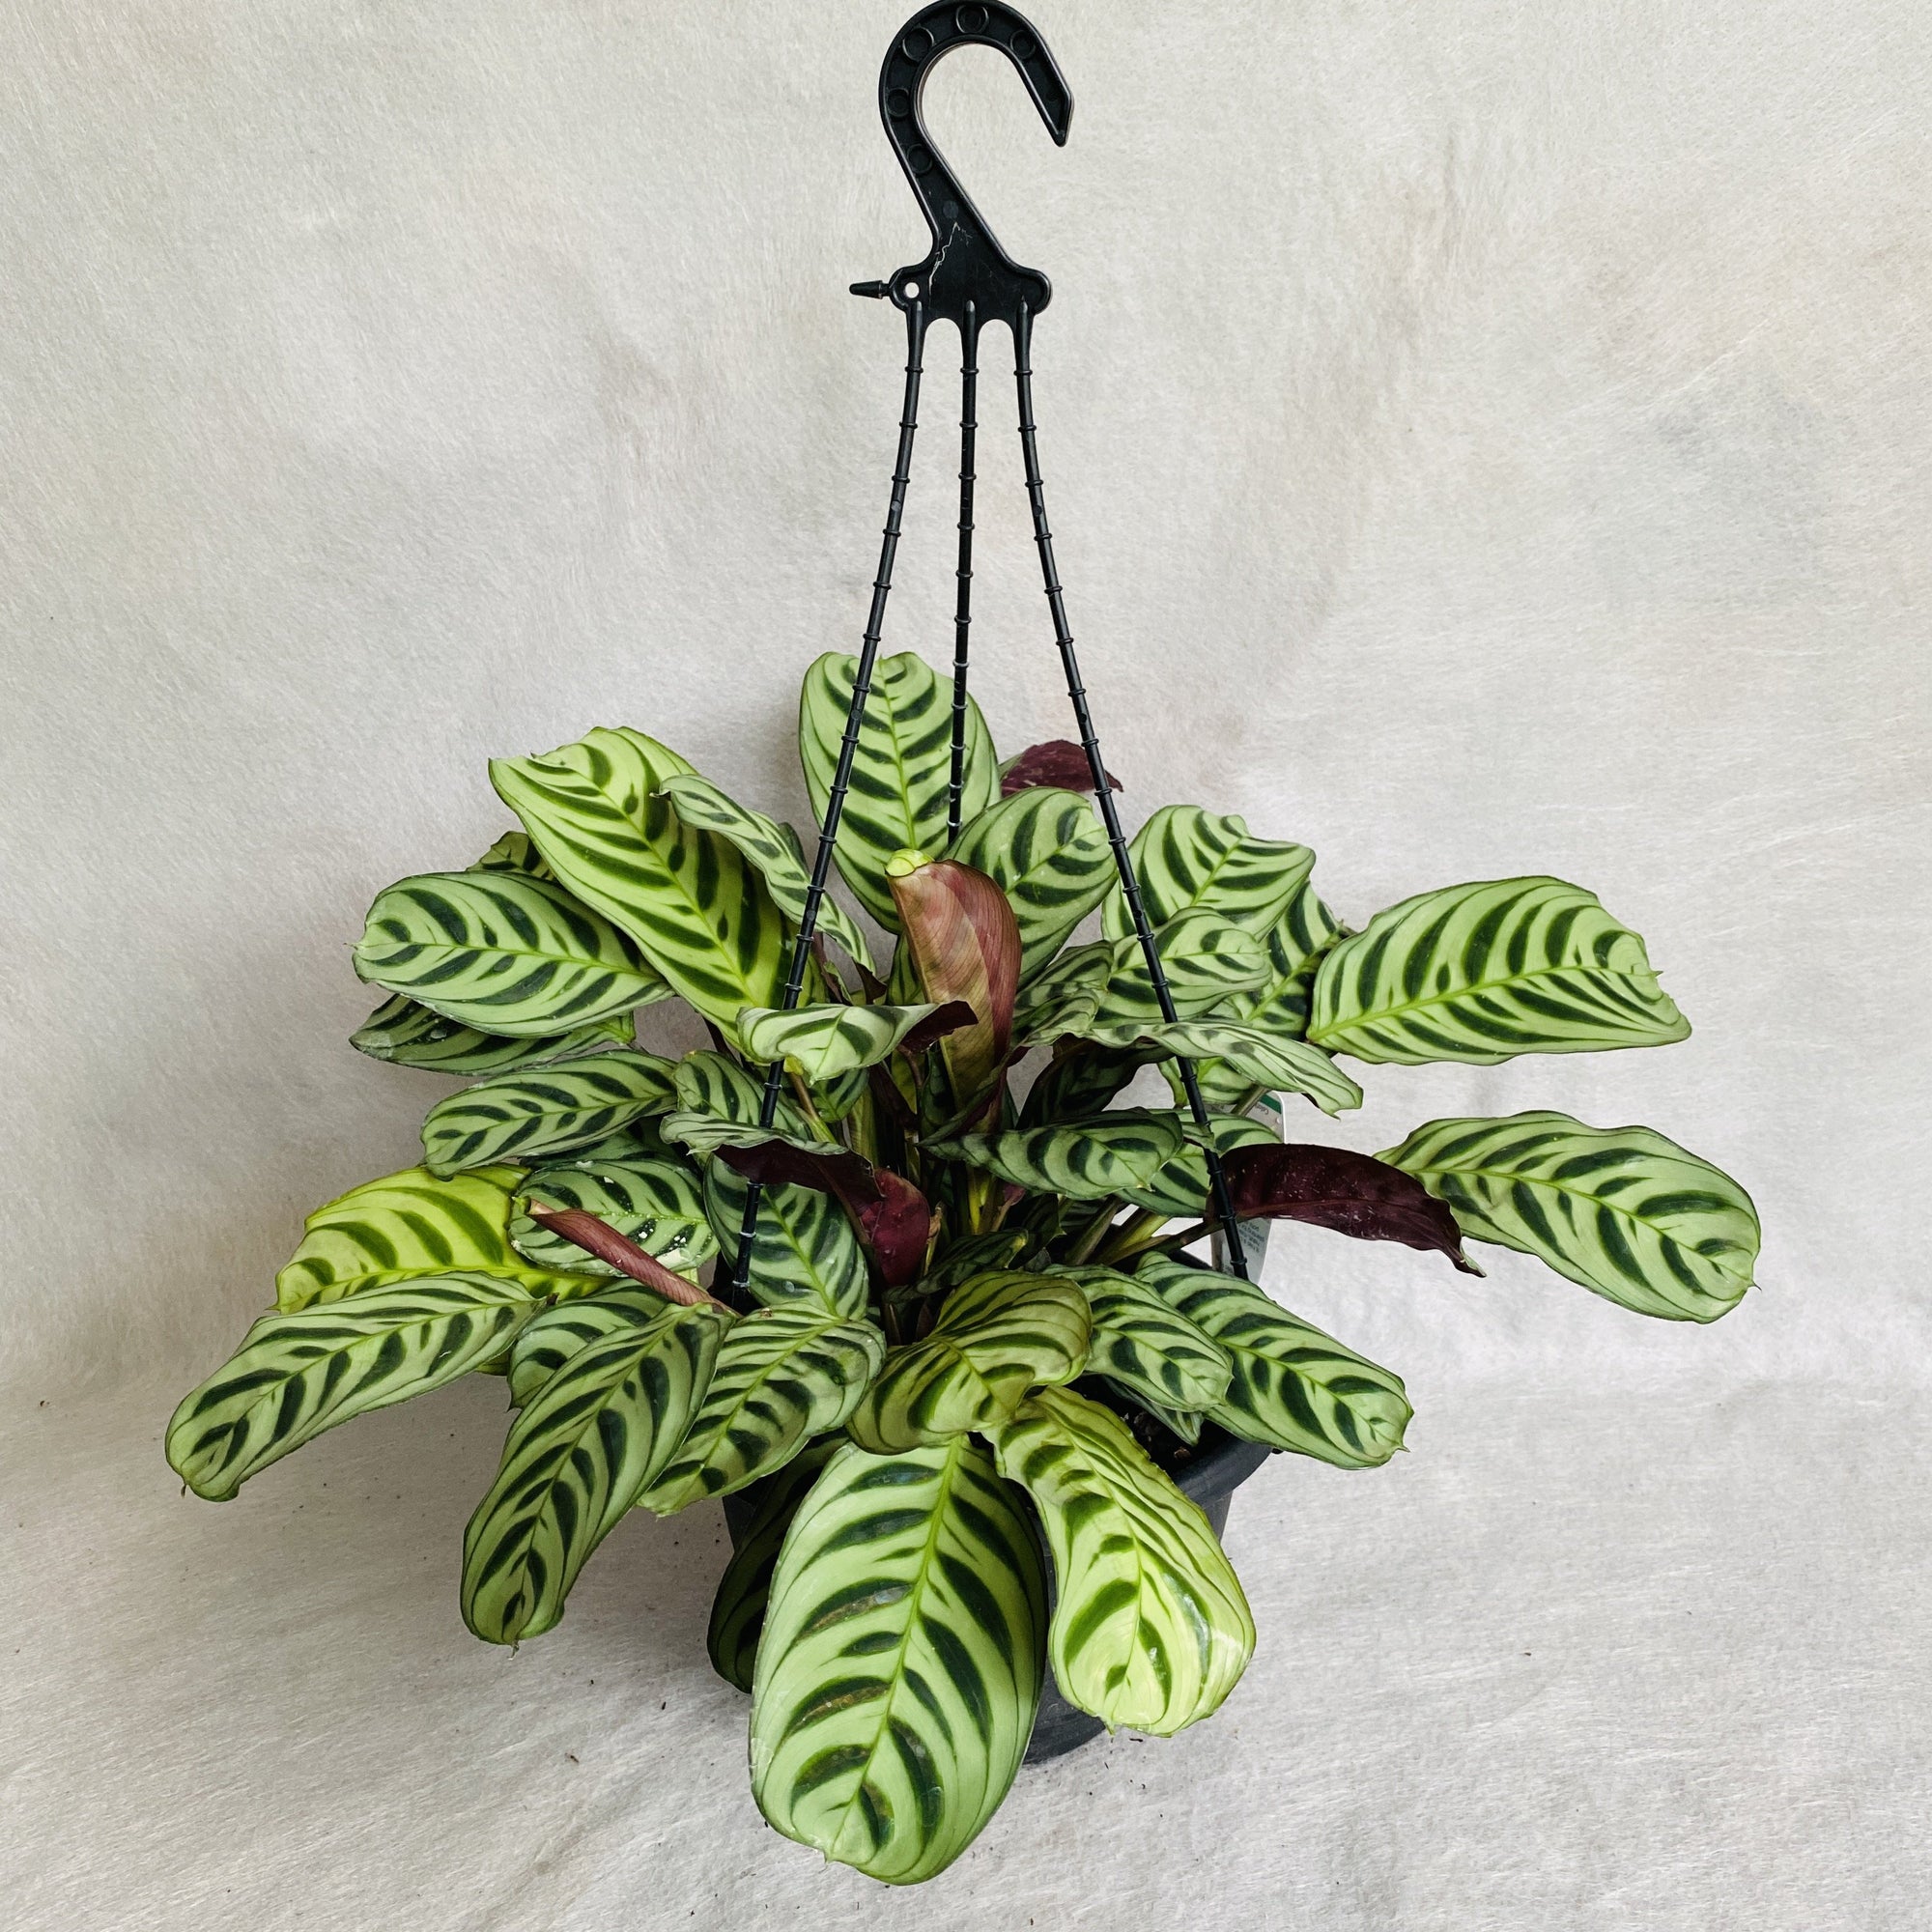 The Ctenanthe burle marxii has long, oval, grey-green leaves with a stunning fishbone pattern